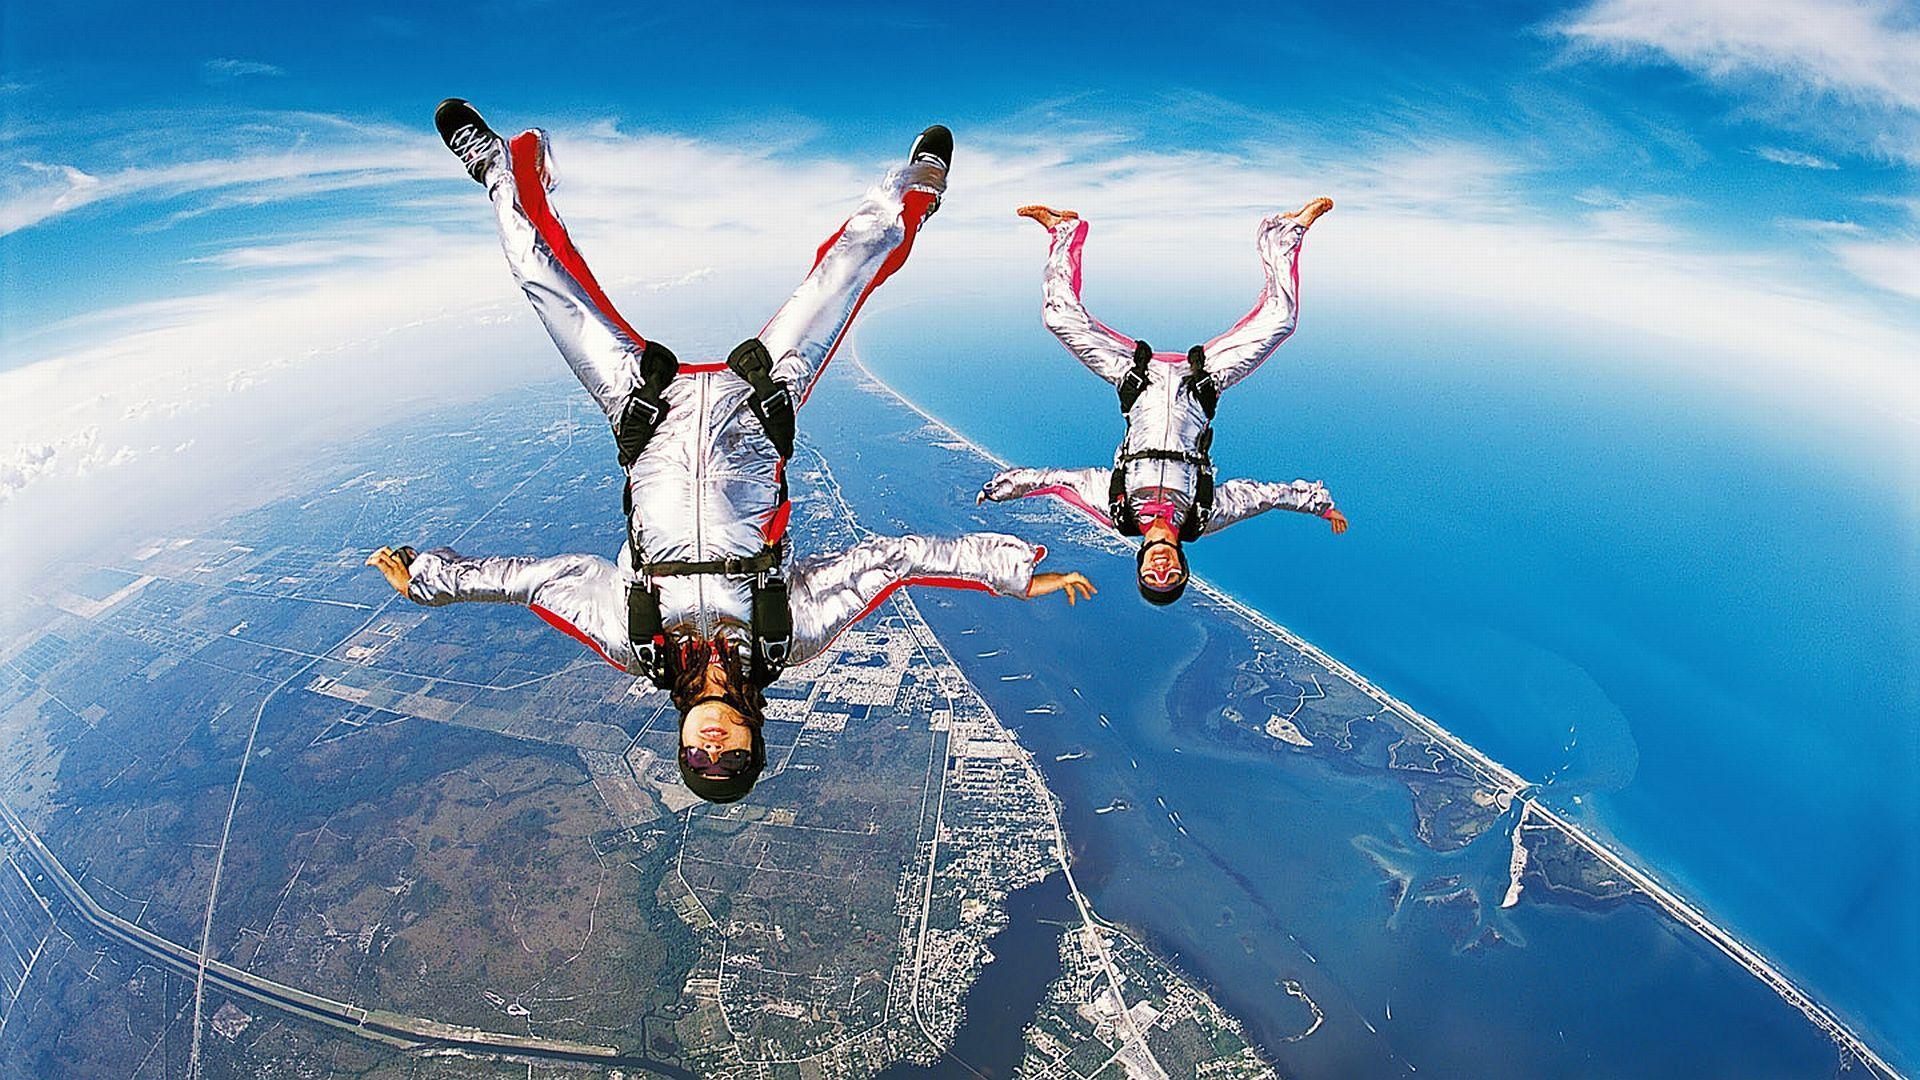 In Gallery: 41 Skydiving HD Wallpaper. Background, BsnSCB.com